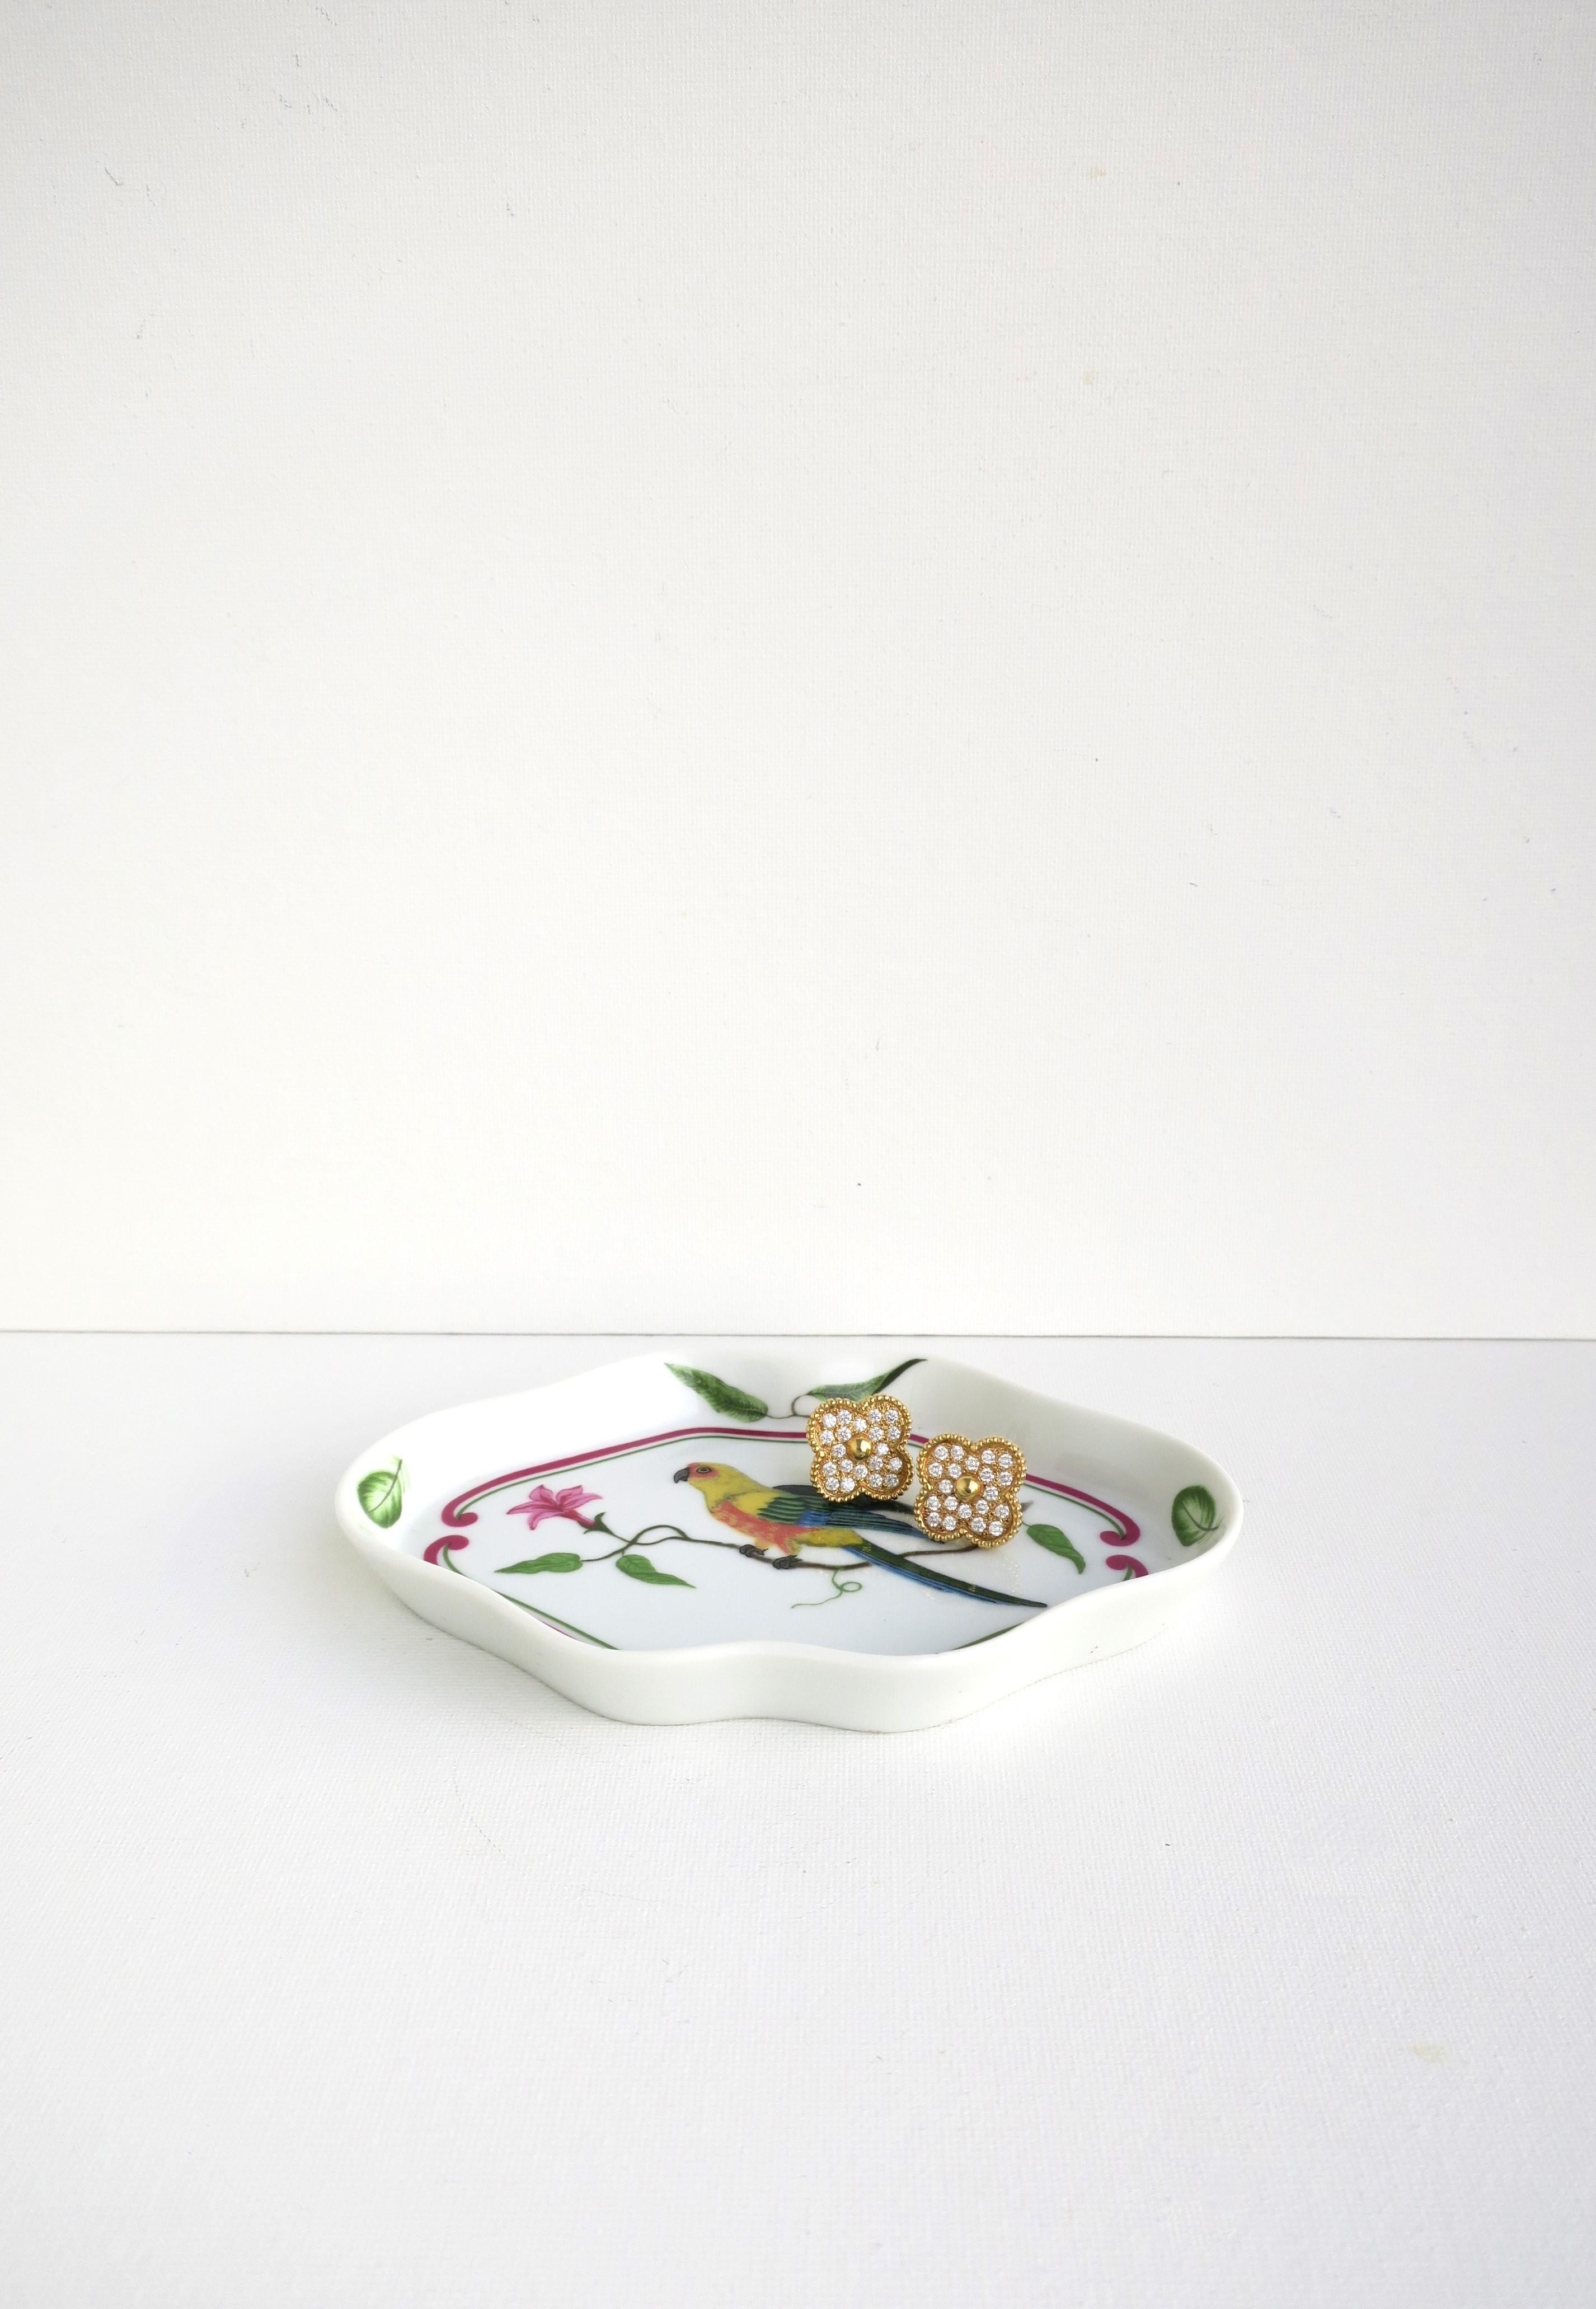 Late 20th Century Porcelain Jewelry Dish with Parrot Bird Design, circa 1980s For Sale